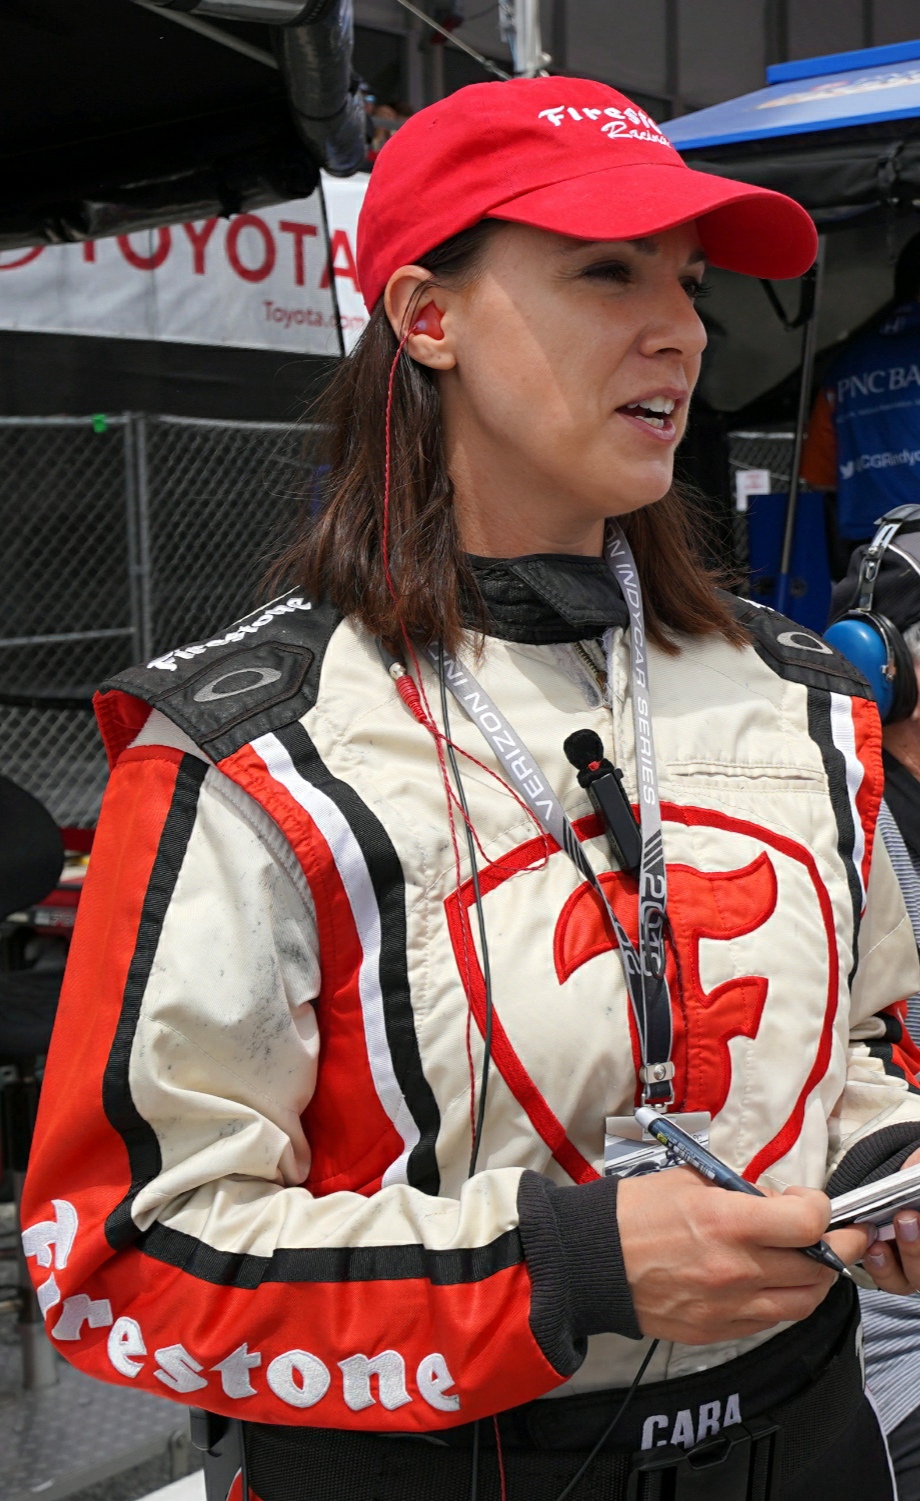 Cara Adams is not only well spoken, but has the knowledge and experience to help keep all the drivers in the NTT IndyCar Series focusing on driving fast and always having a consistent tire to race on.